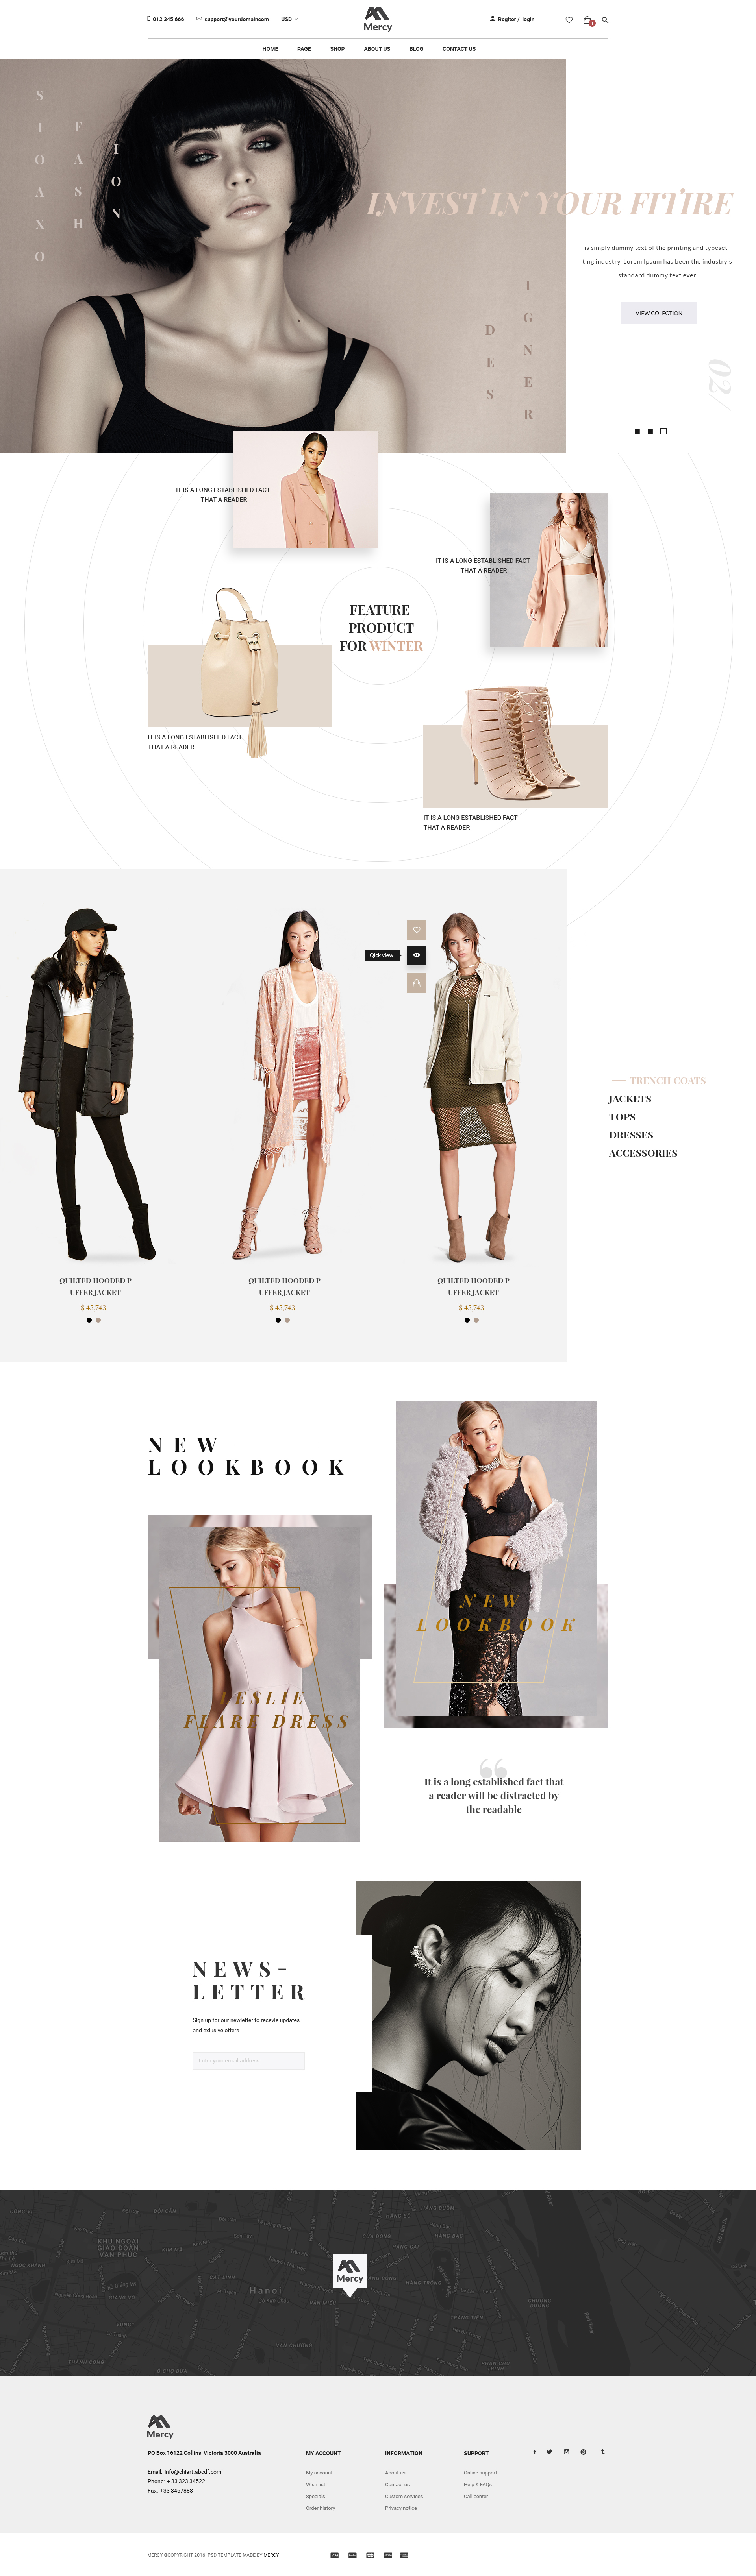 Mercy - Stunning eCommerce PSD Template for Fashion by 1protheme ...